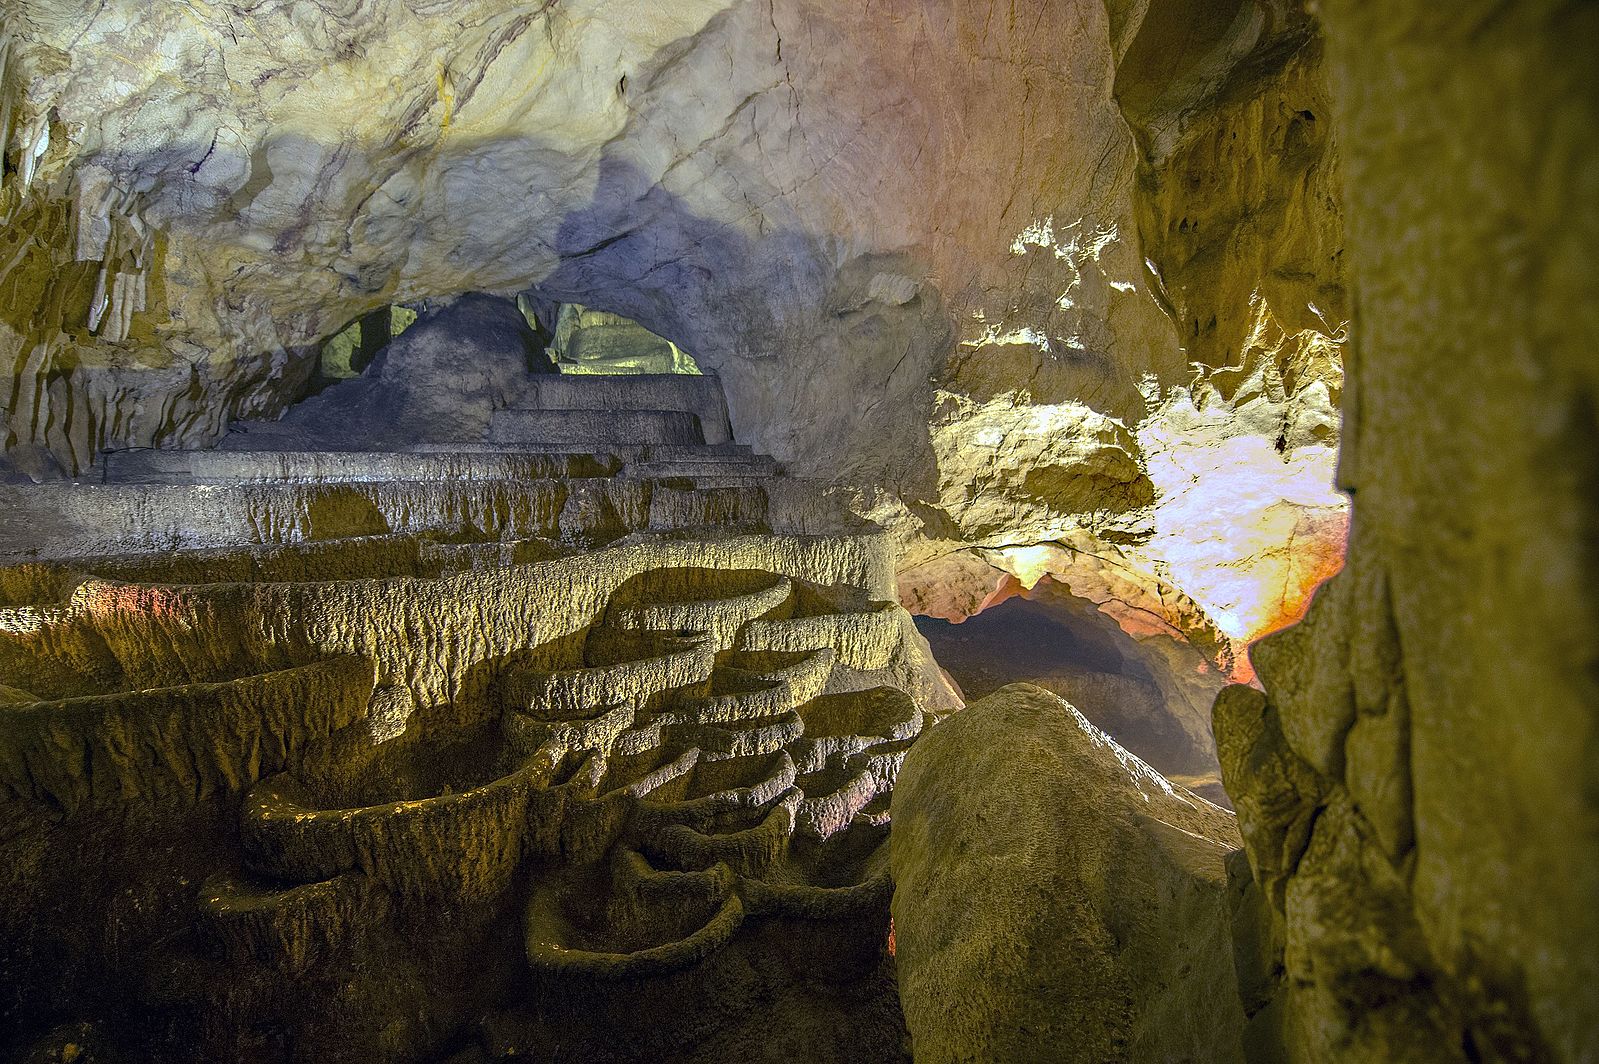 The Sleeping beauty cave in Radavc